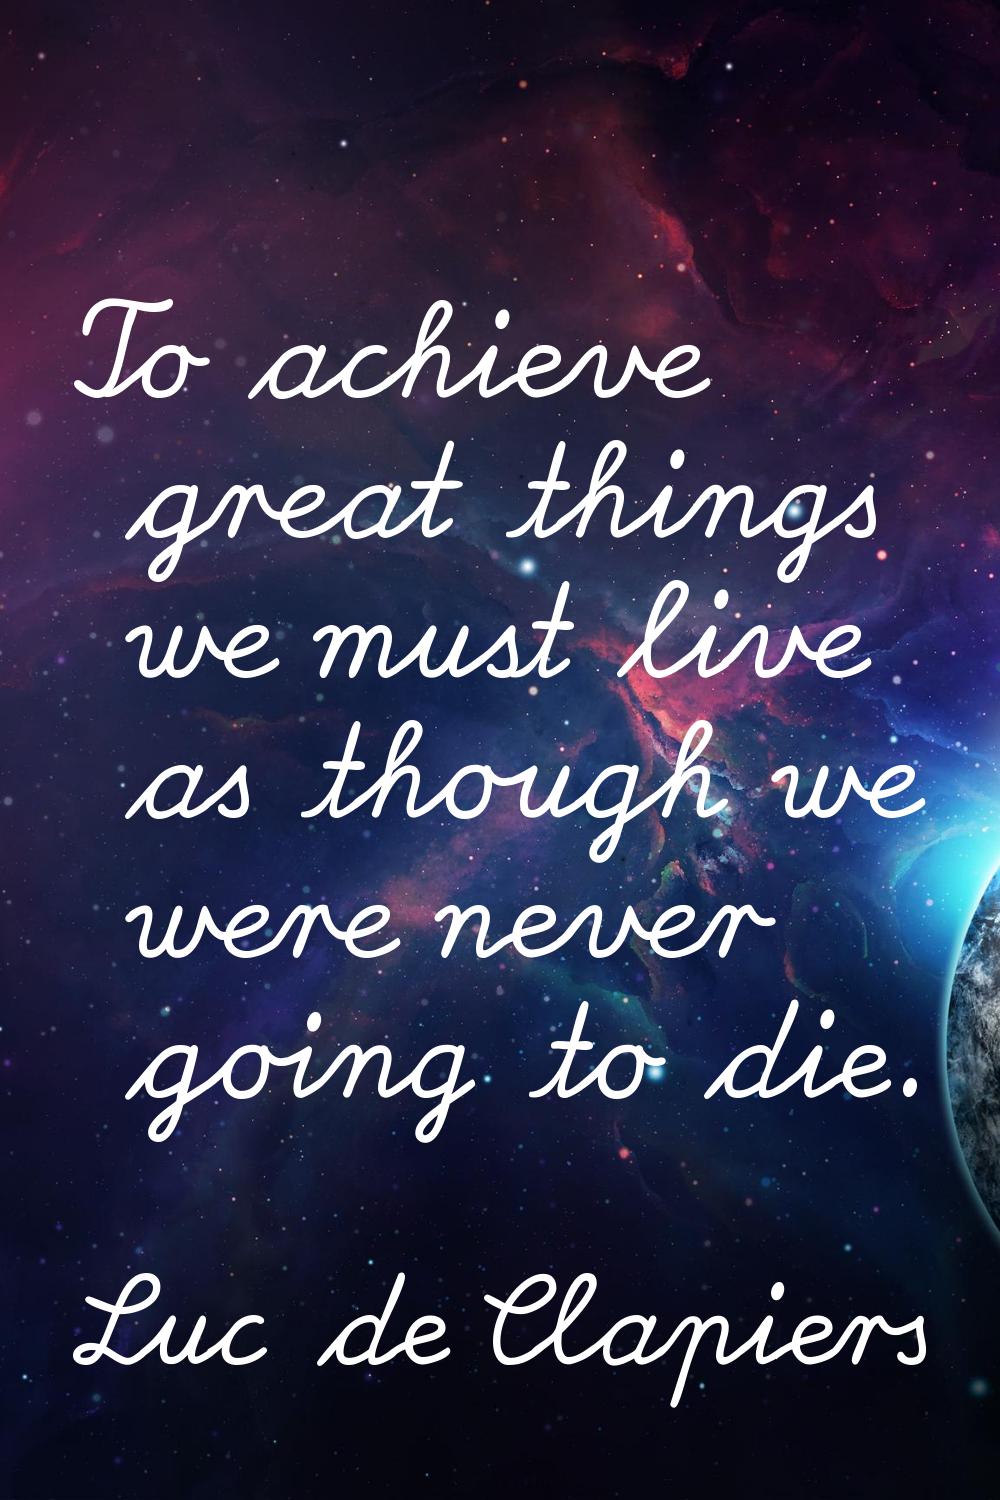 To achieve great things we must live as though we were never going to die.